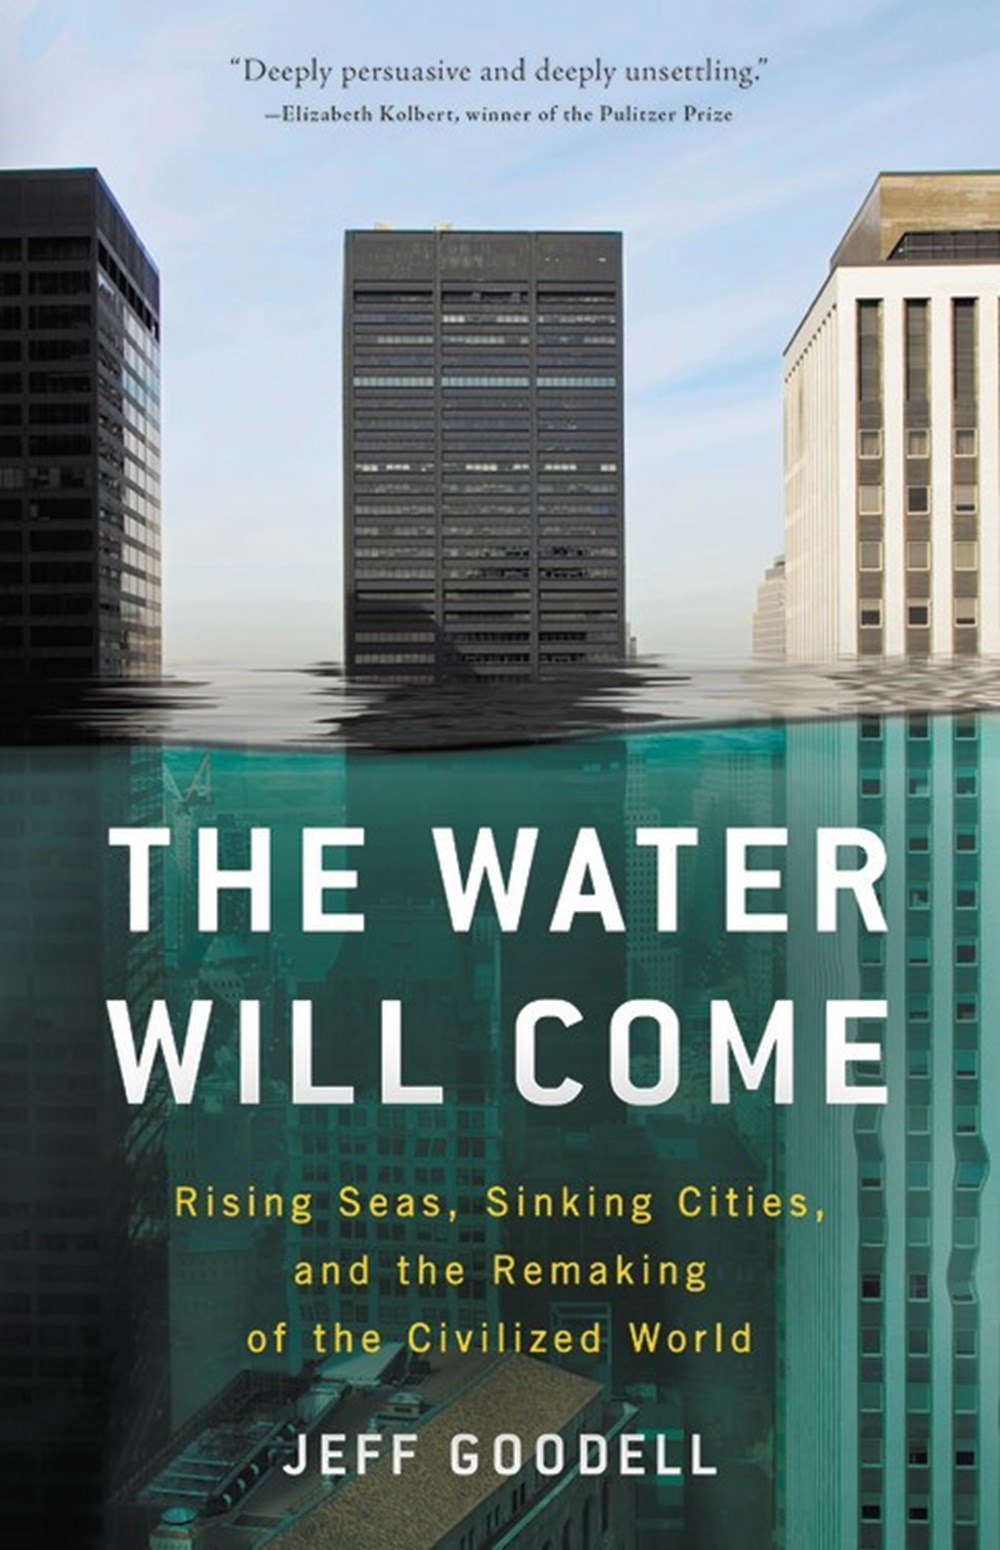 Water Will Come: Rising Seas, Sinking Cities, and the Remaking of the Civilized World